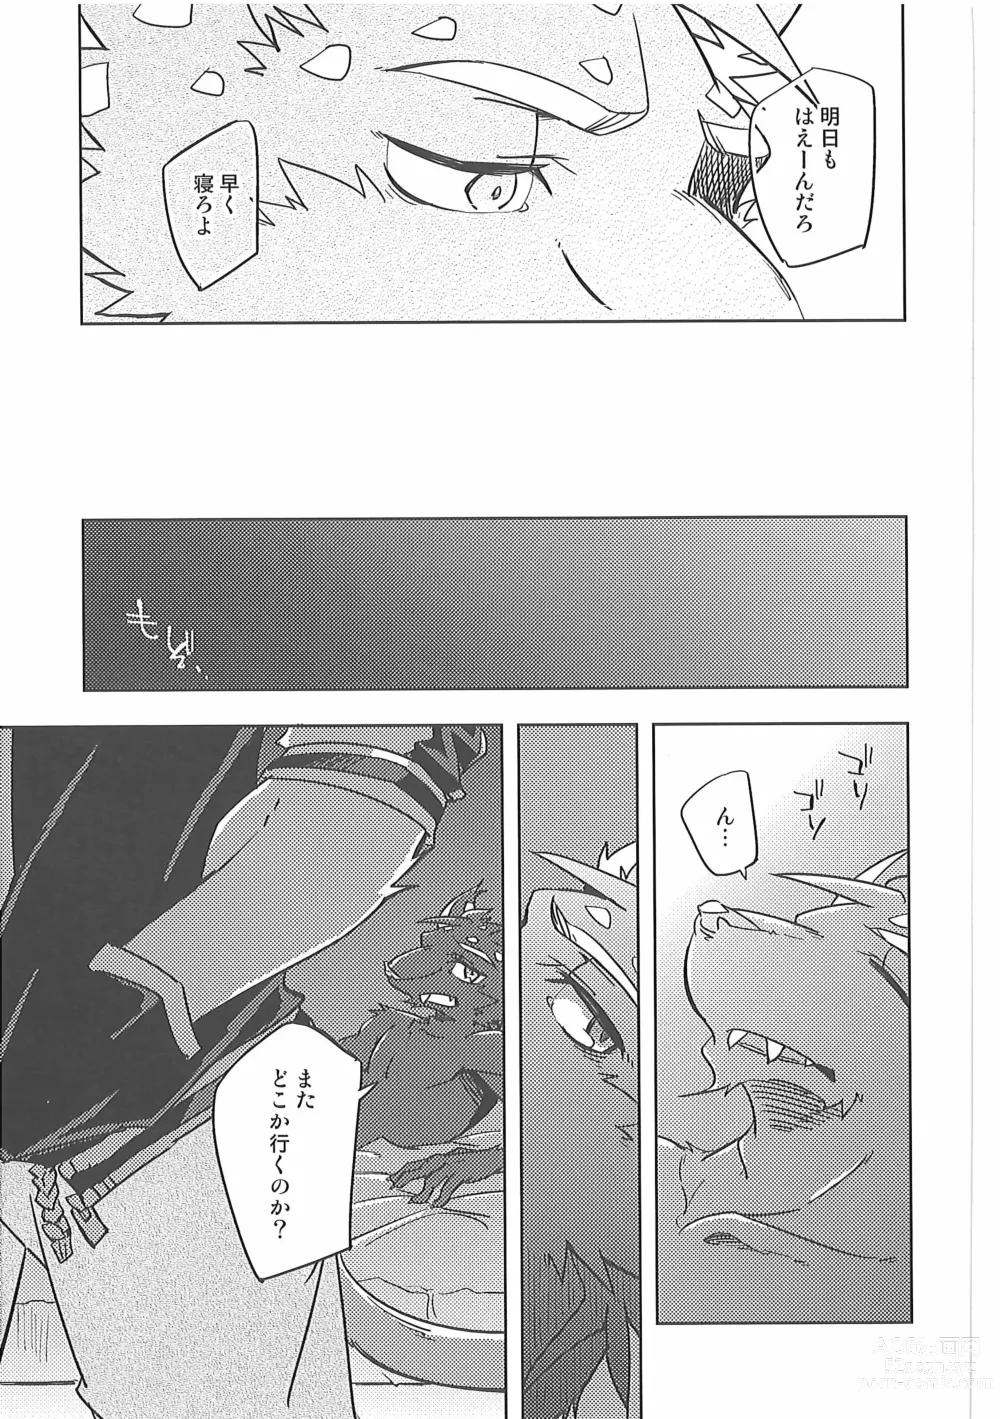 Page 22 of doujinshi Invisible Triangle